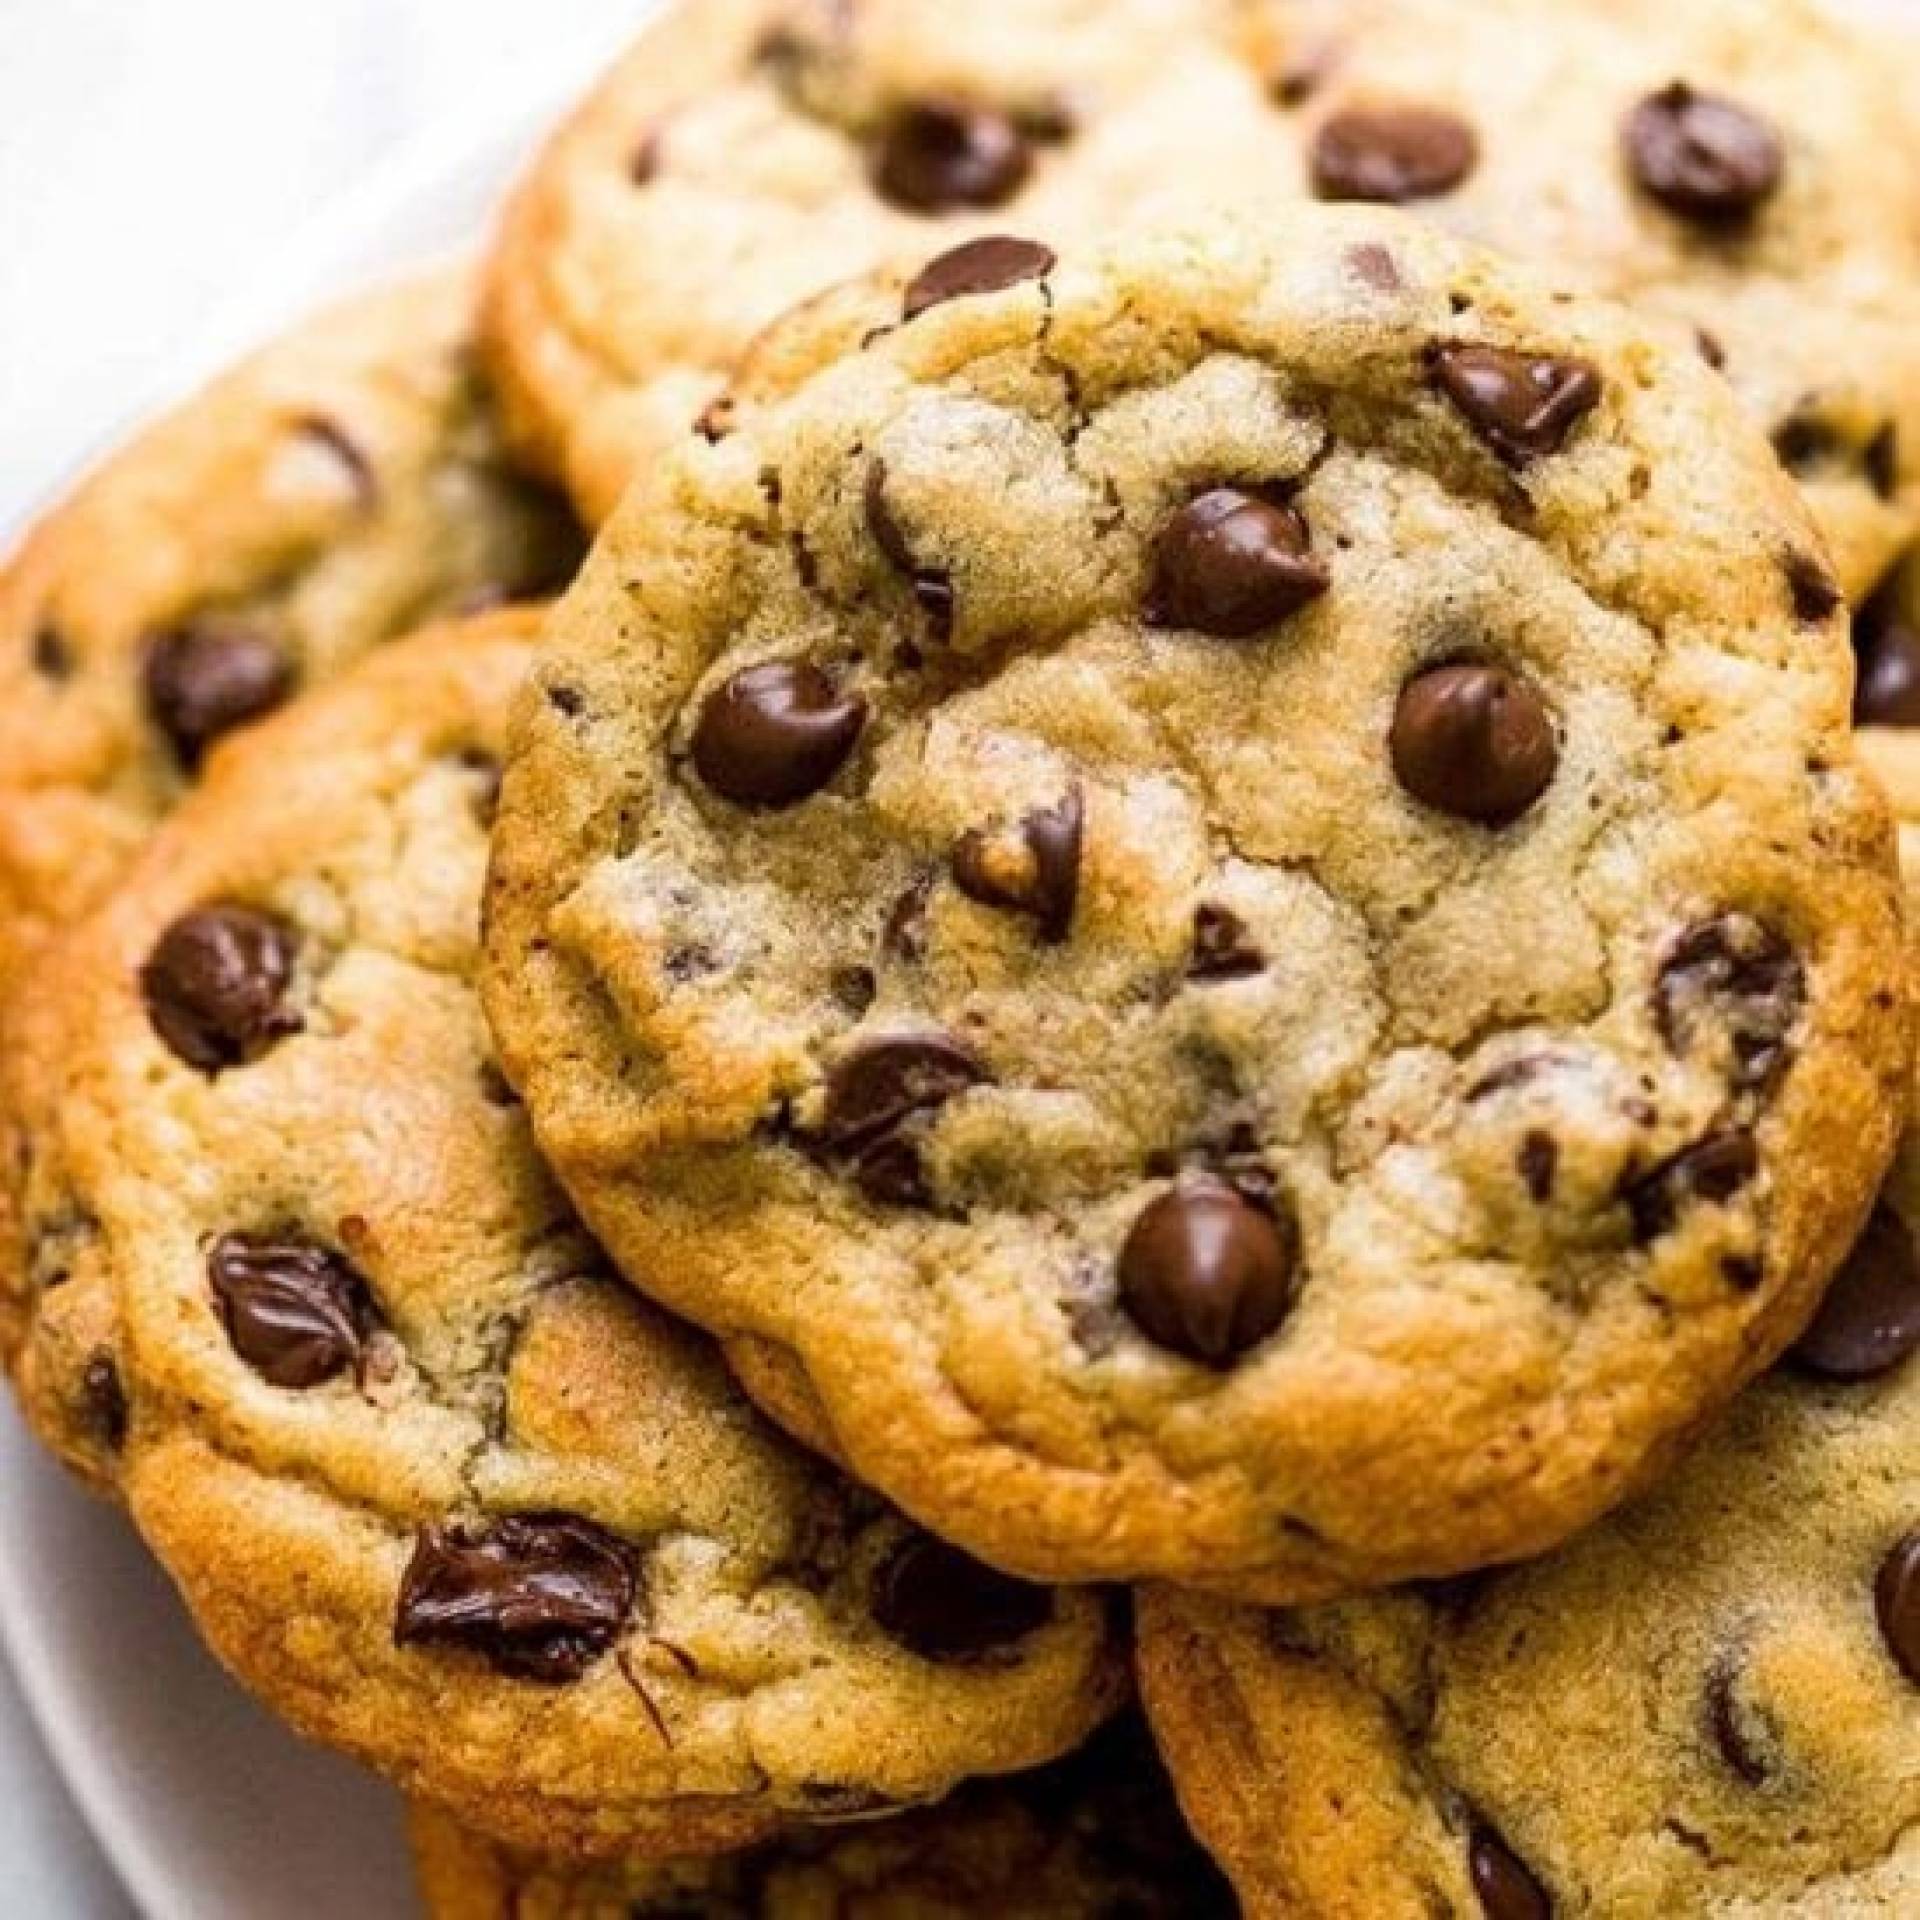 Chocolate Chip Cookie 6 pack